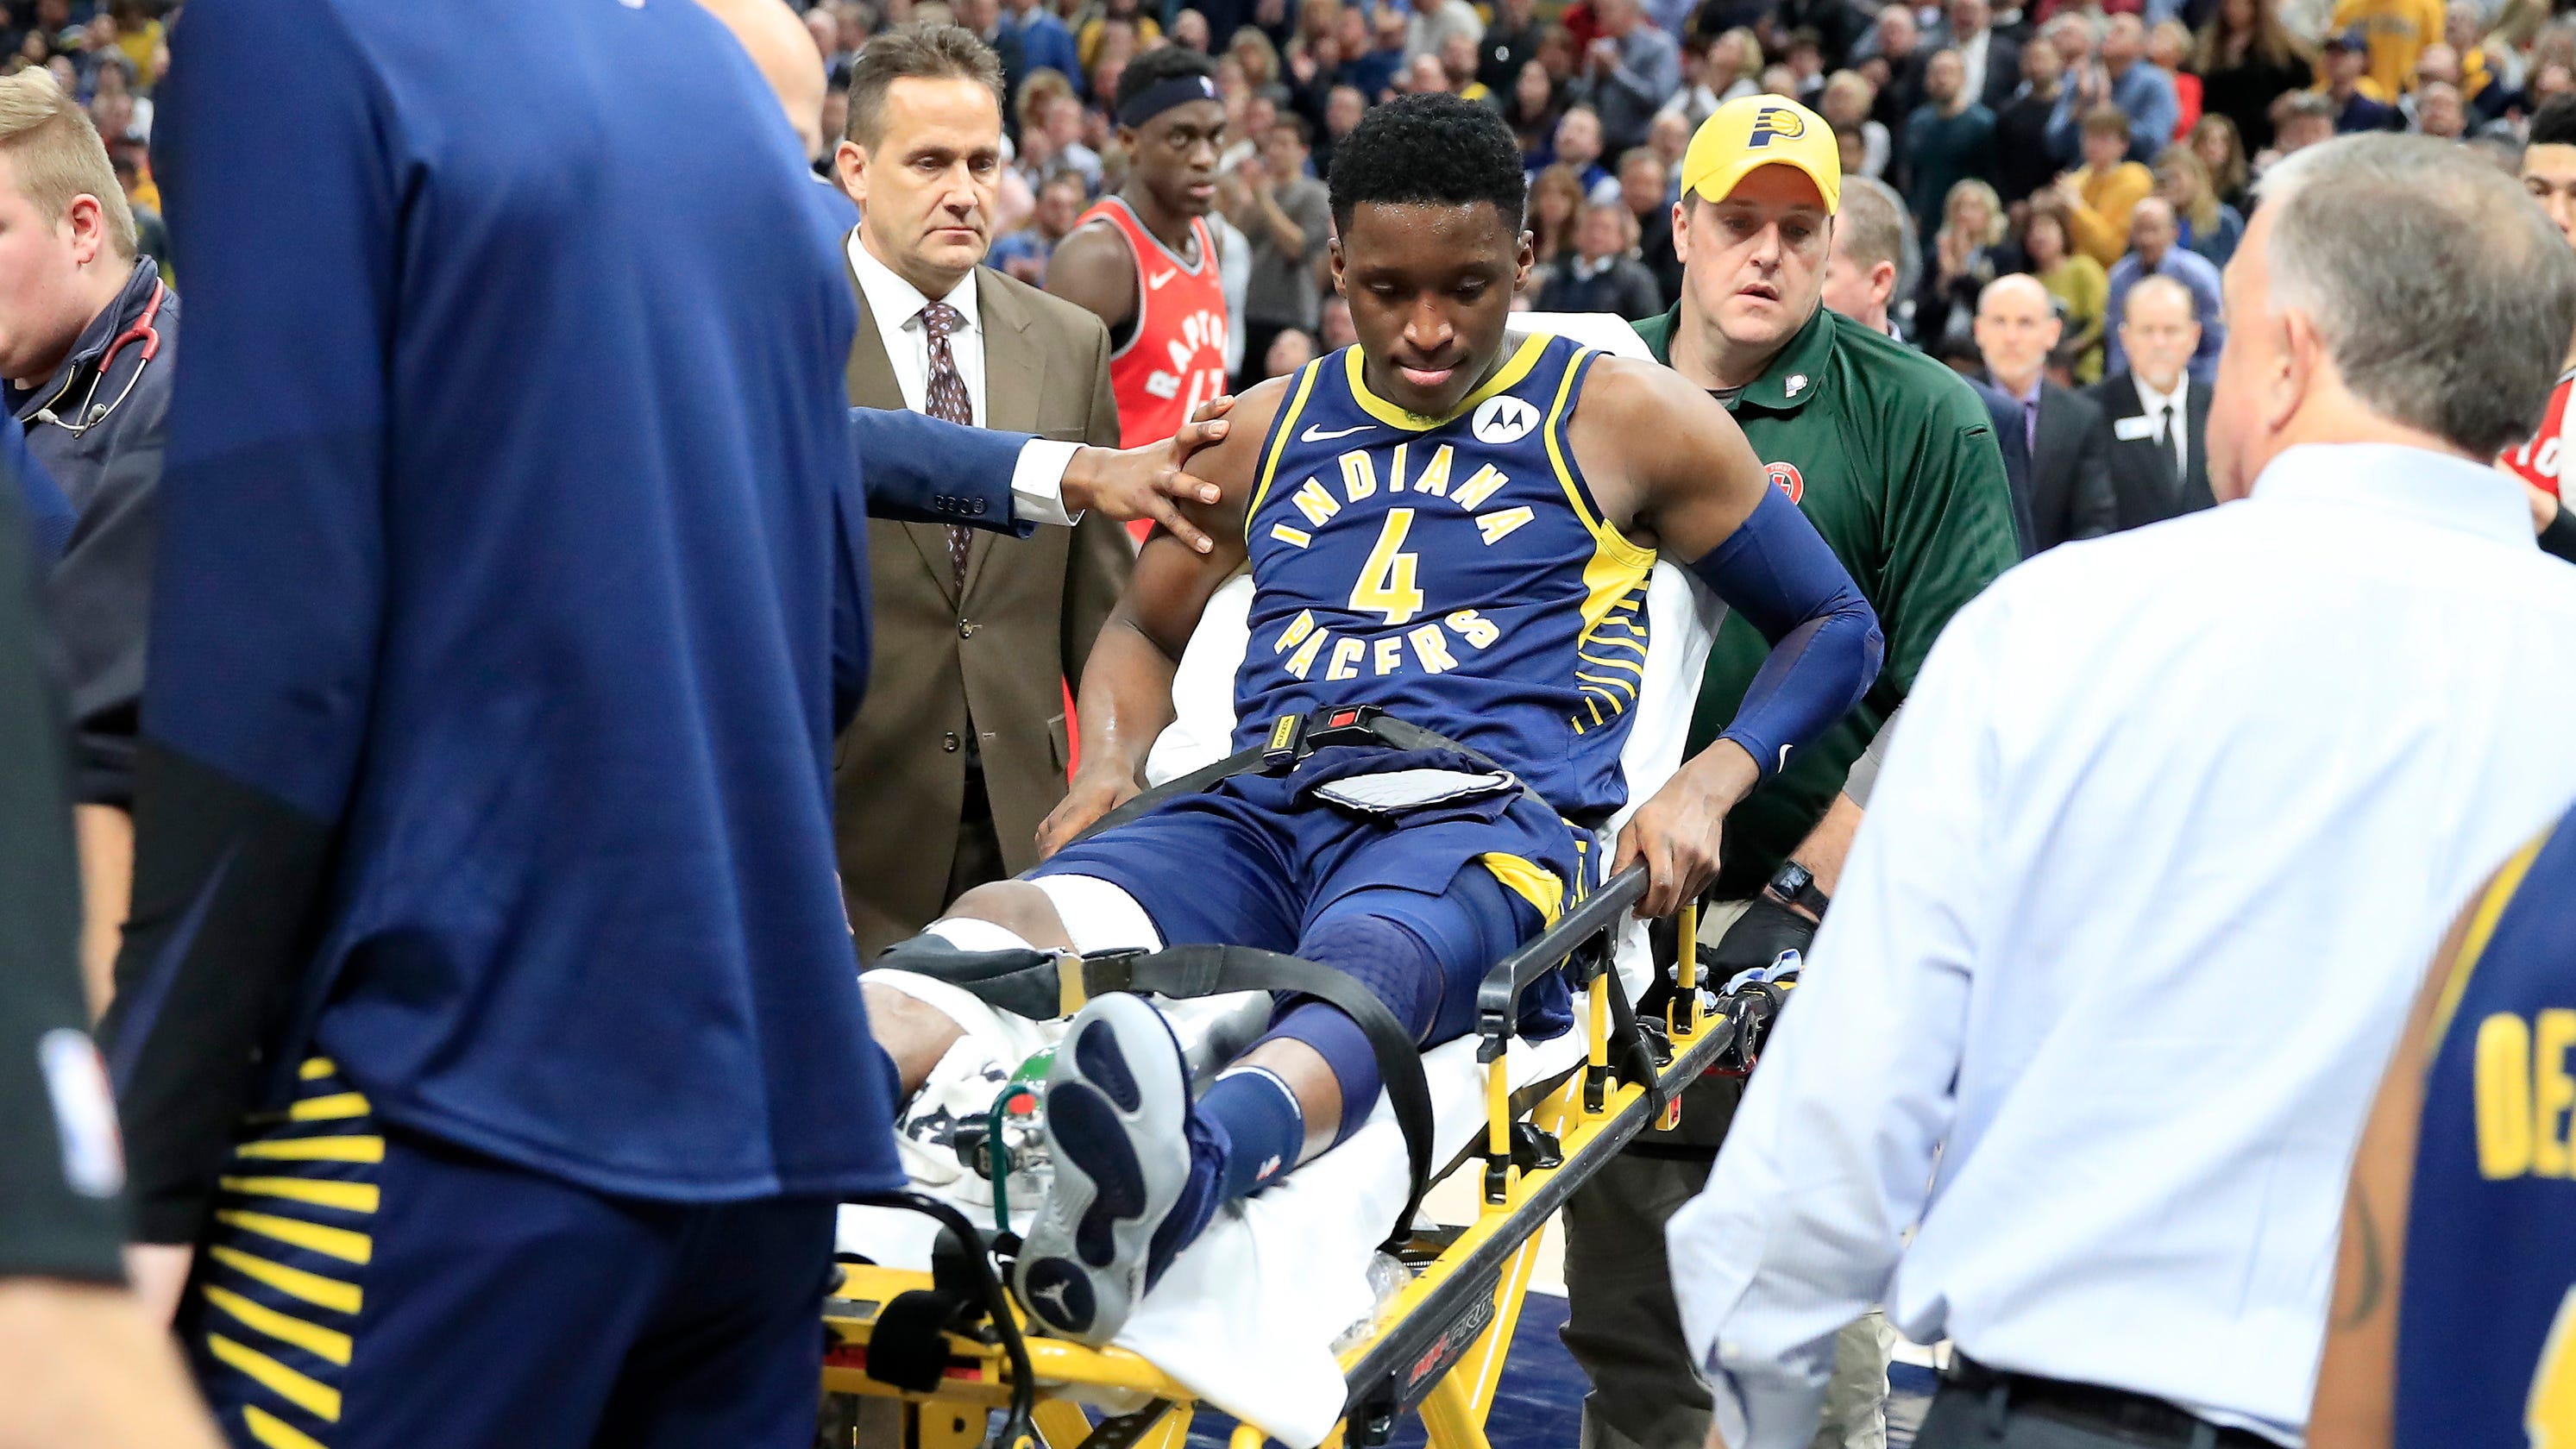 Doctor explains Victor Oladipo's ruptured quad tendon injury, recovery2986 x 1680